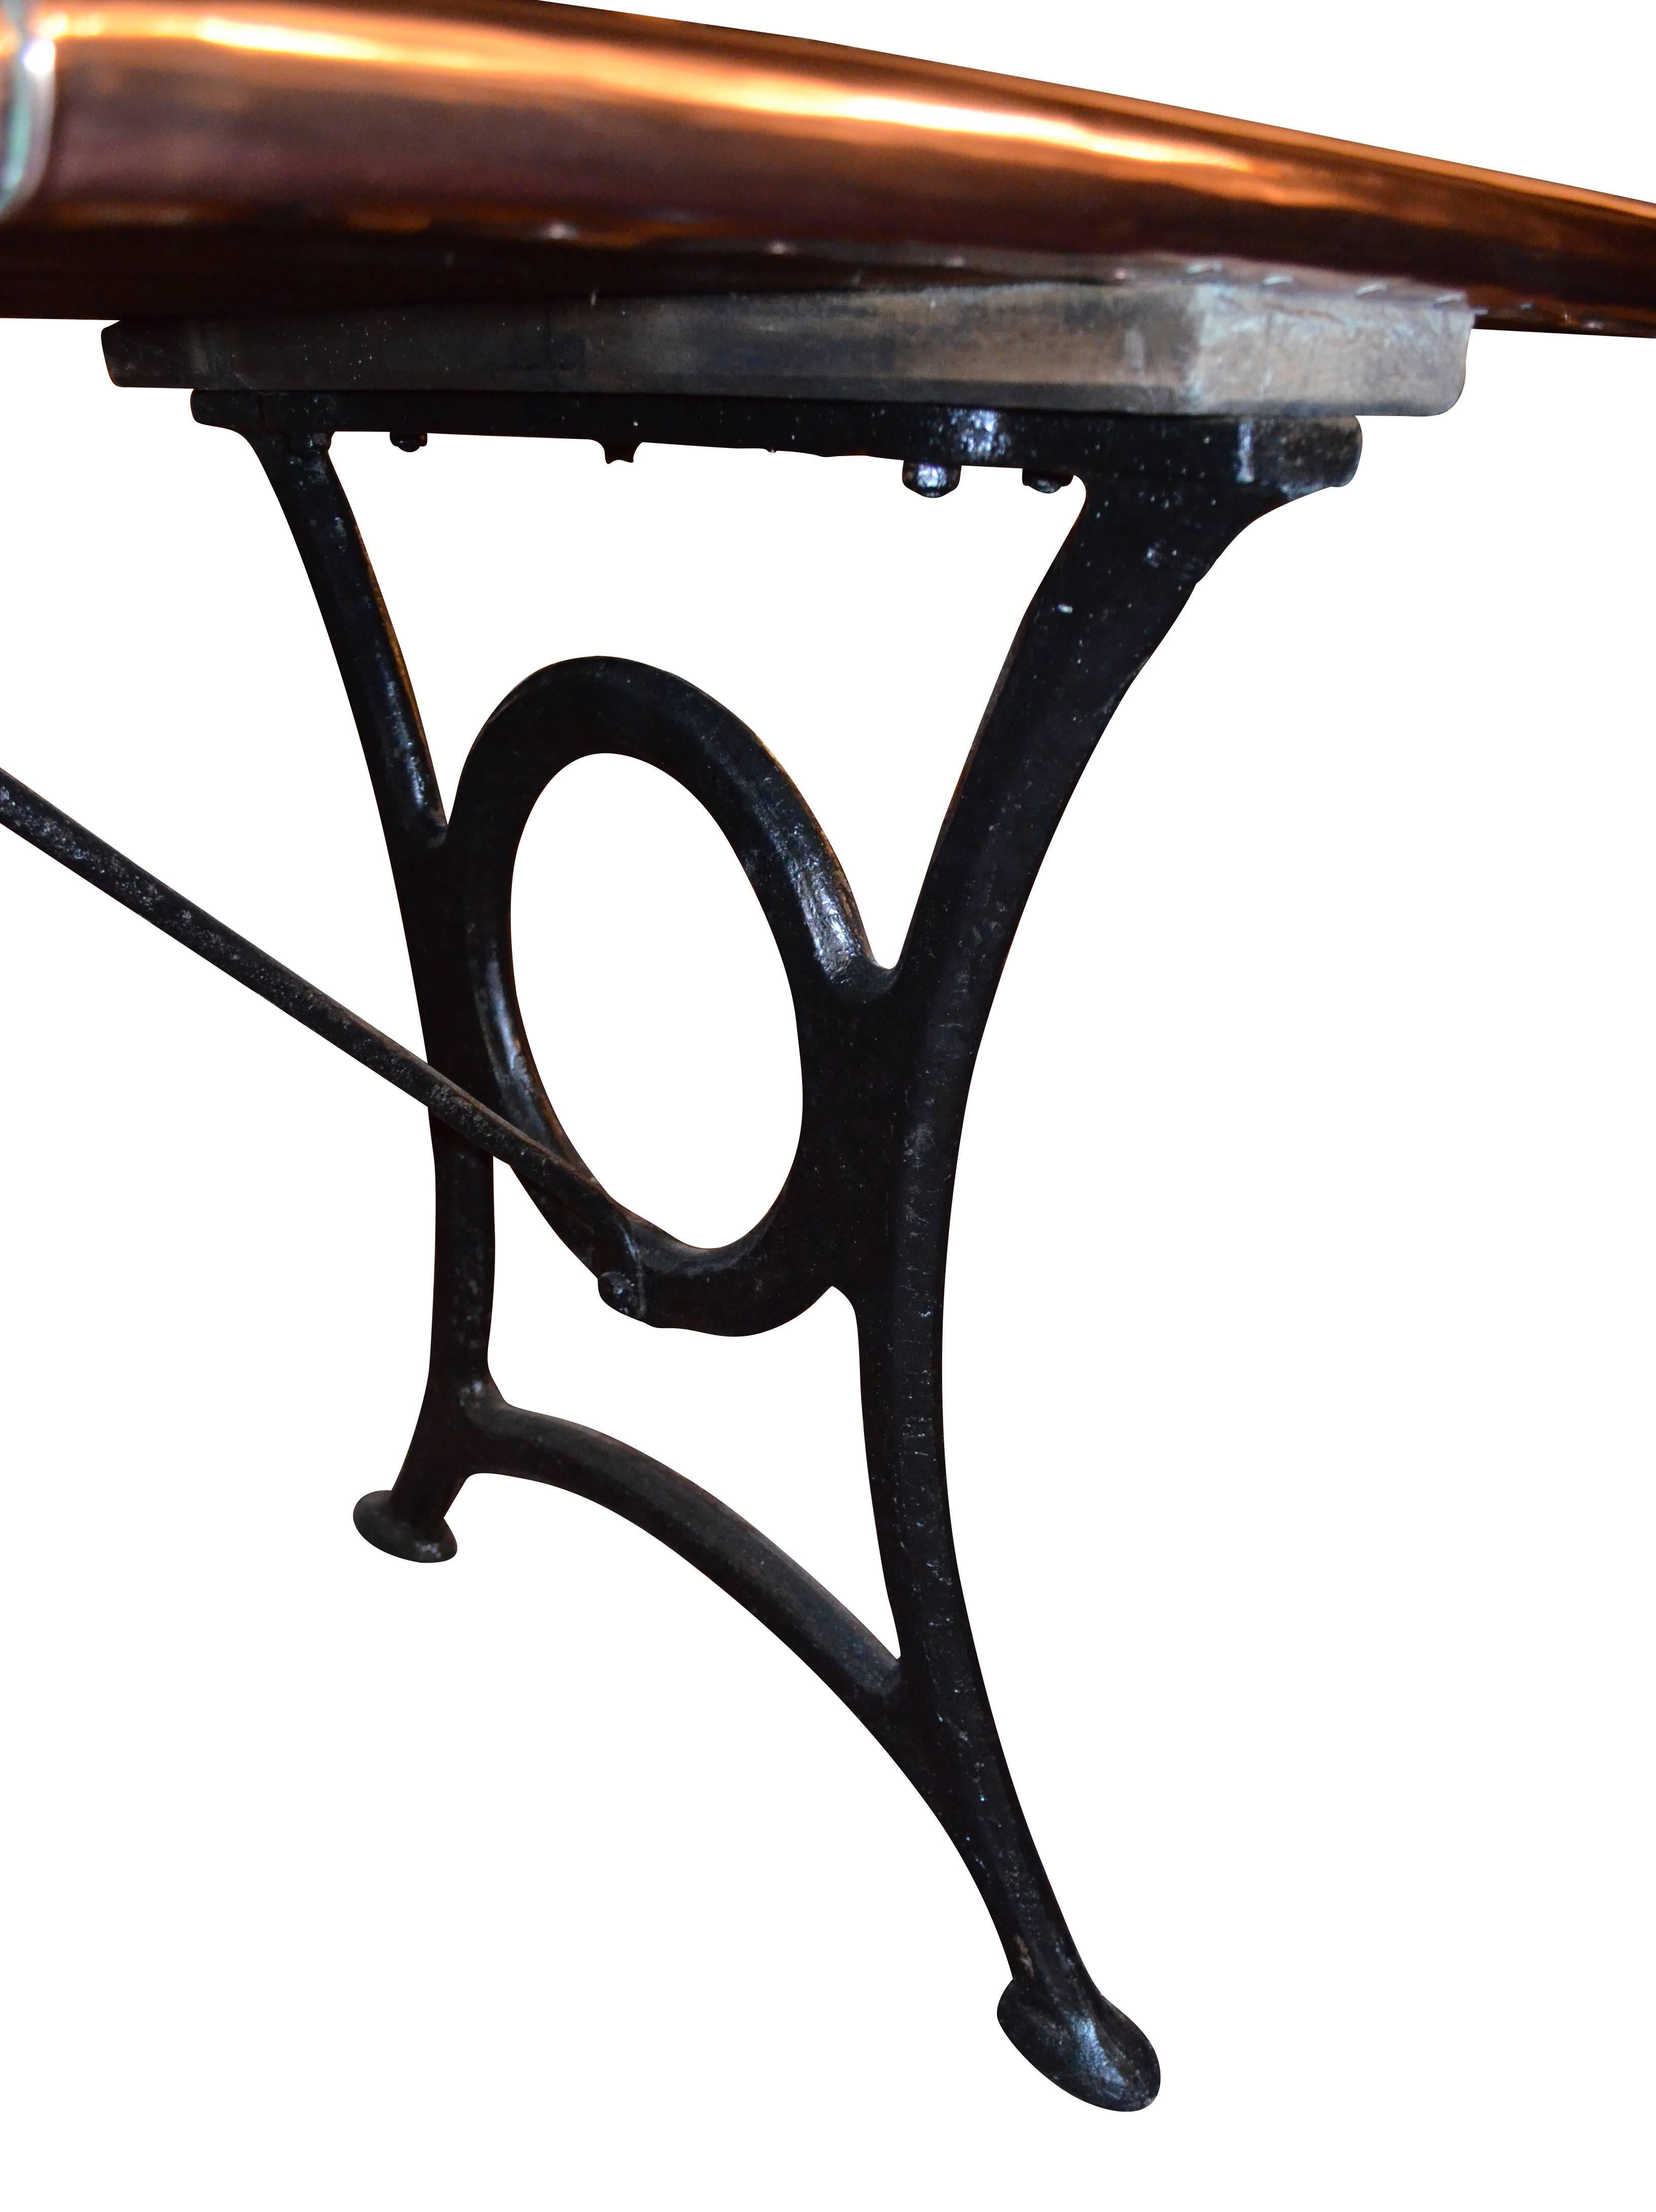 19th century Victorian wrought iron and polished copper table, circa 1880, English.